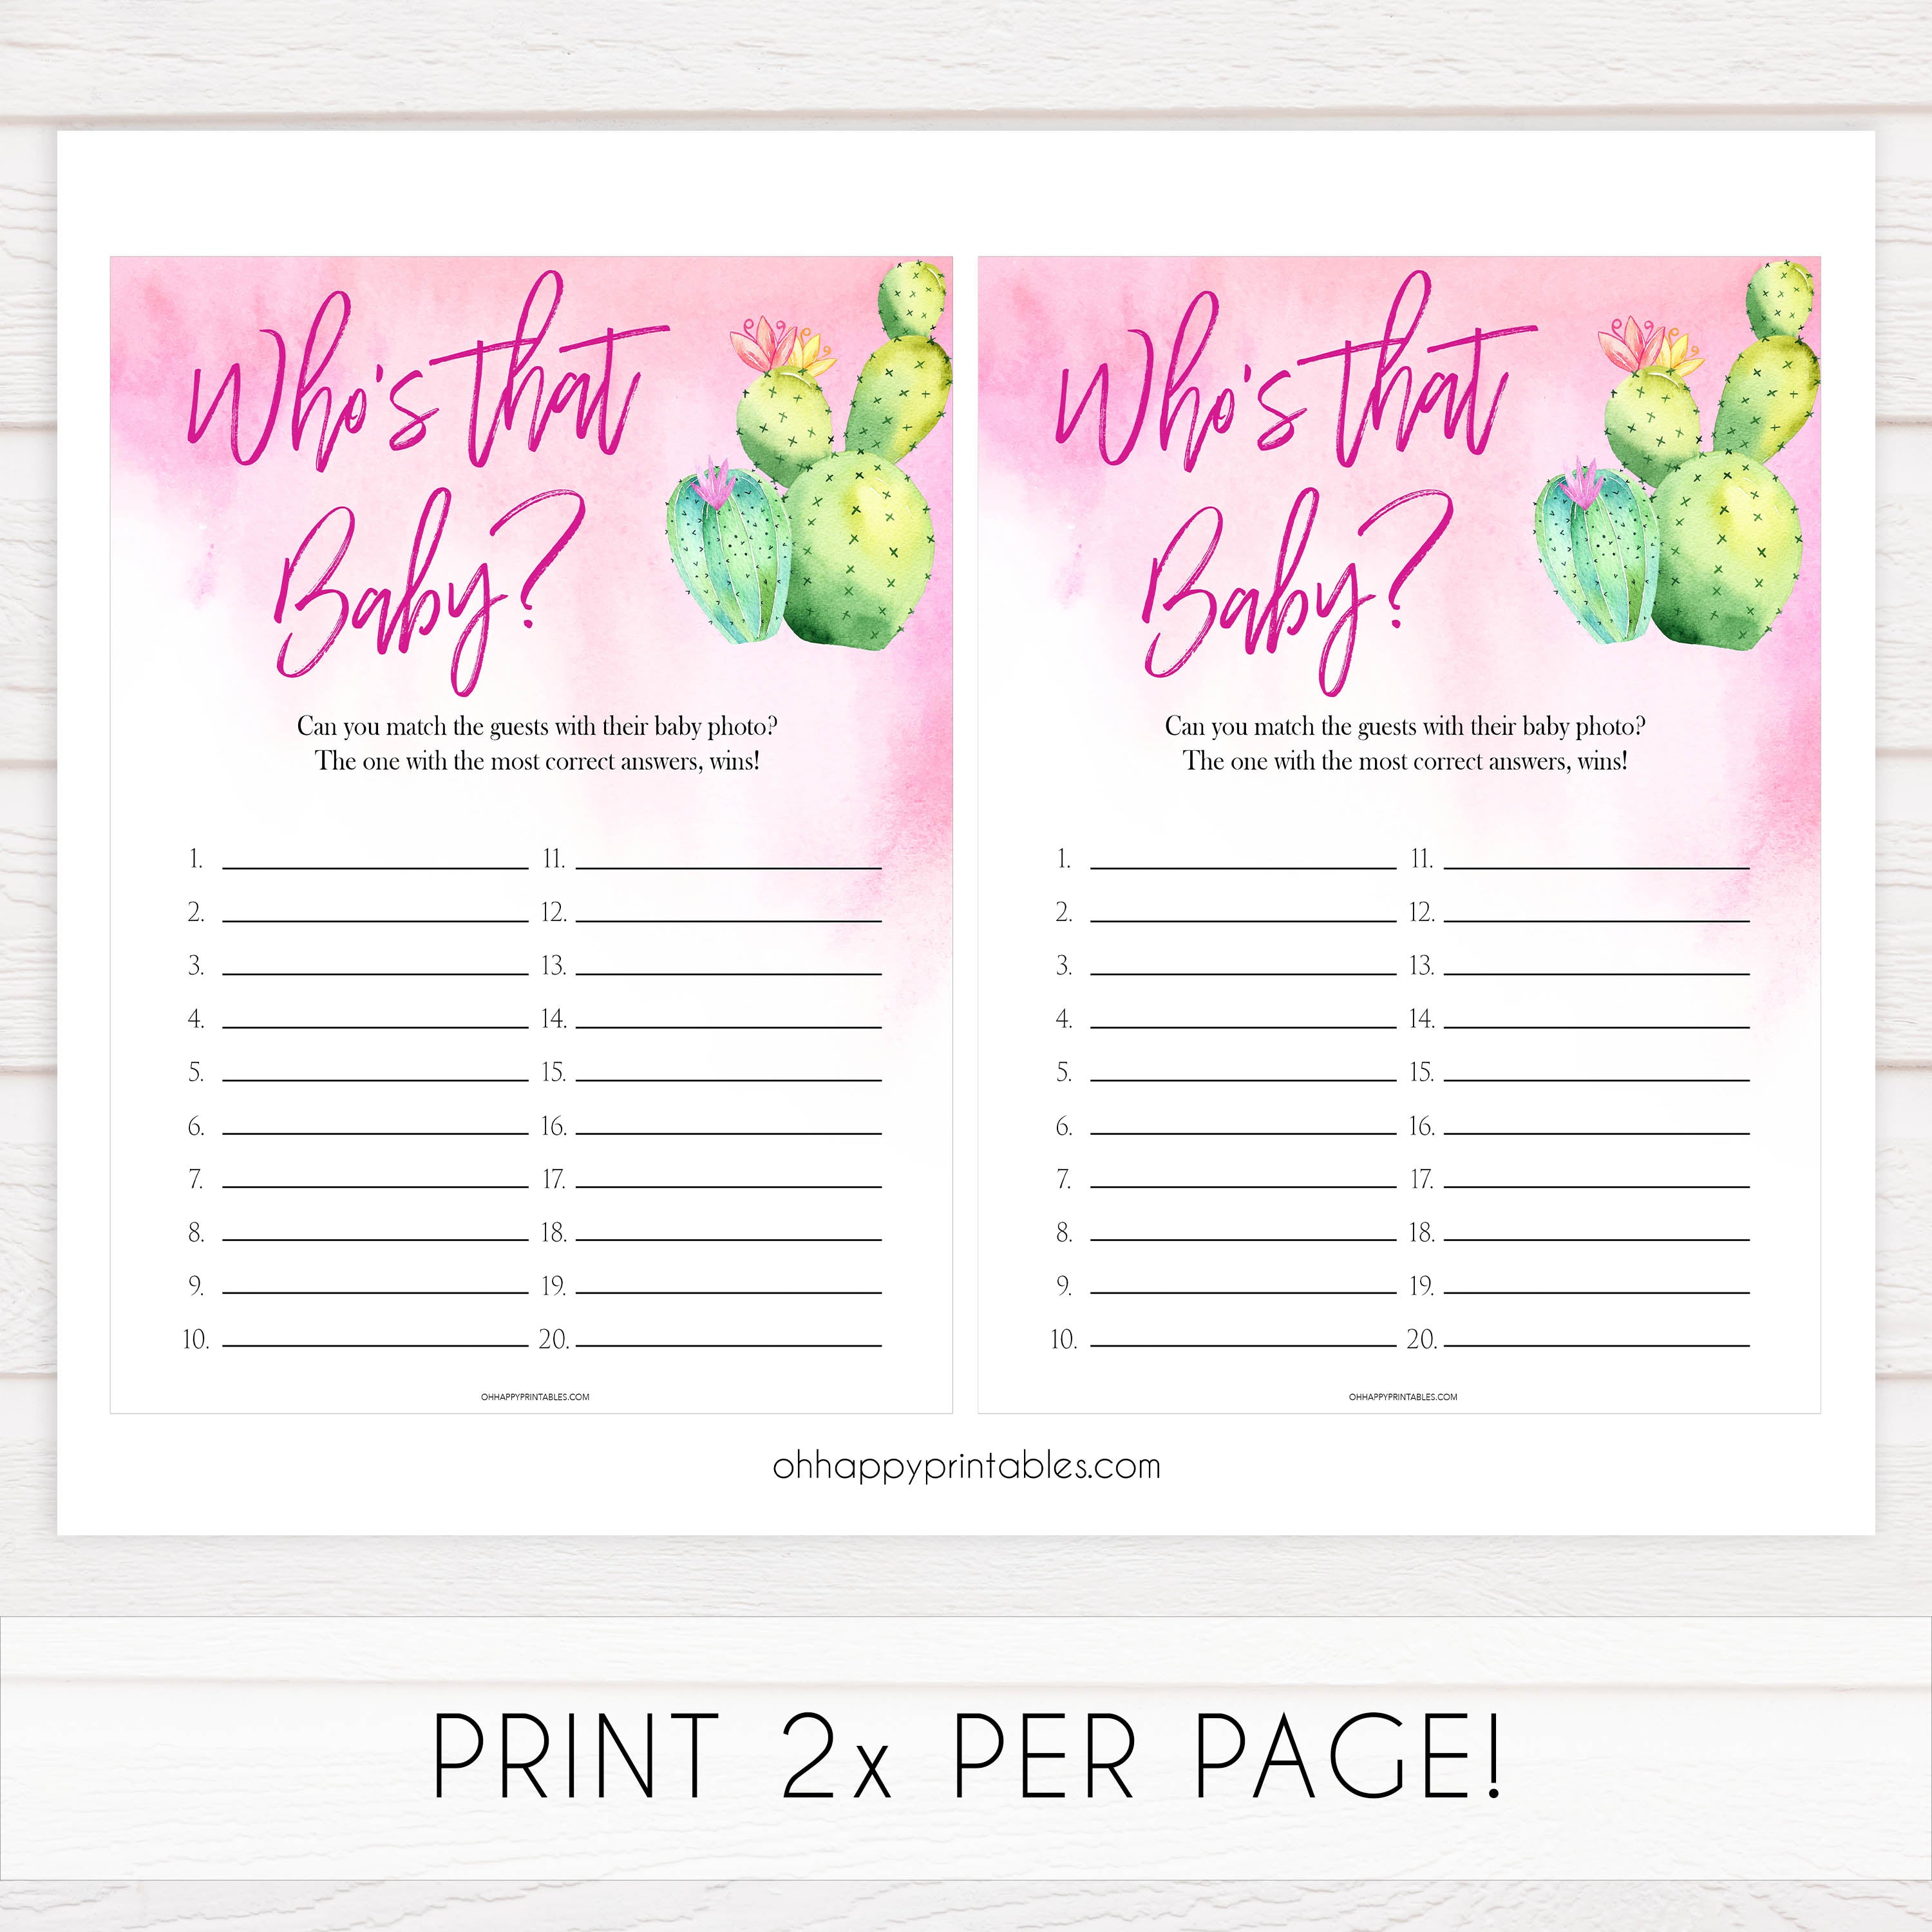 Cactus baby games, whos that baby, guess the baby pictures, printable baby shower games, Mexican baby shower, fun baby games, top baby games, best baby games, baby shower games